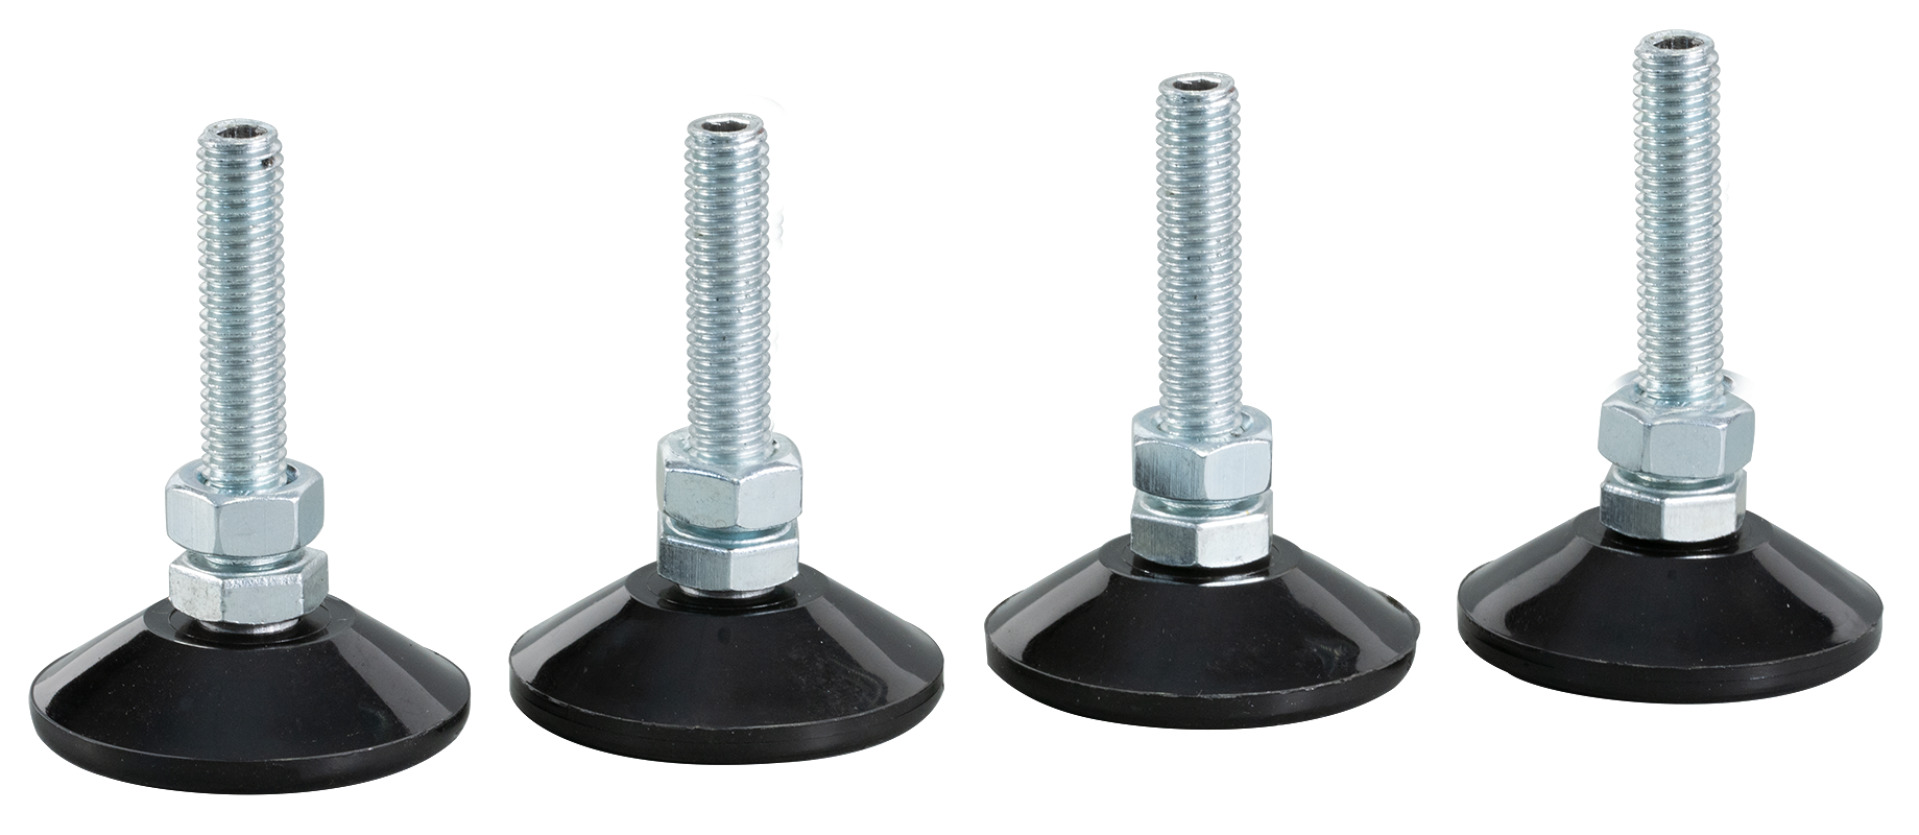 Leveling Feet for Cabinet Series OFFICE and Wall Housings, 4 Pcs. M8